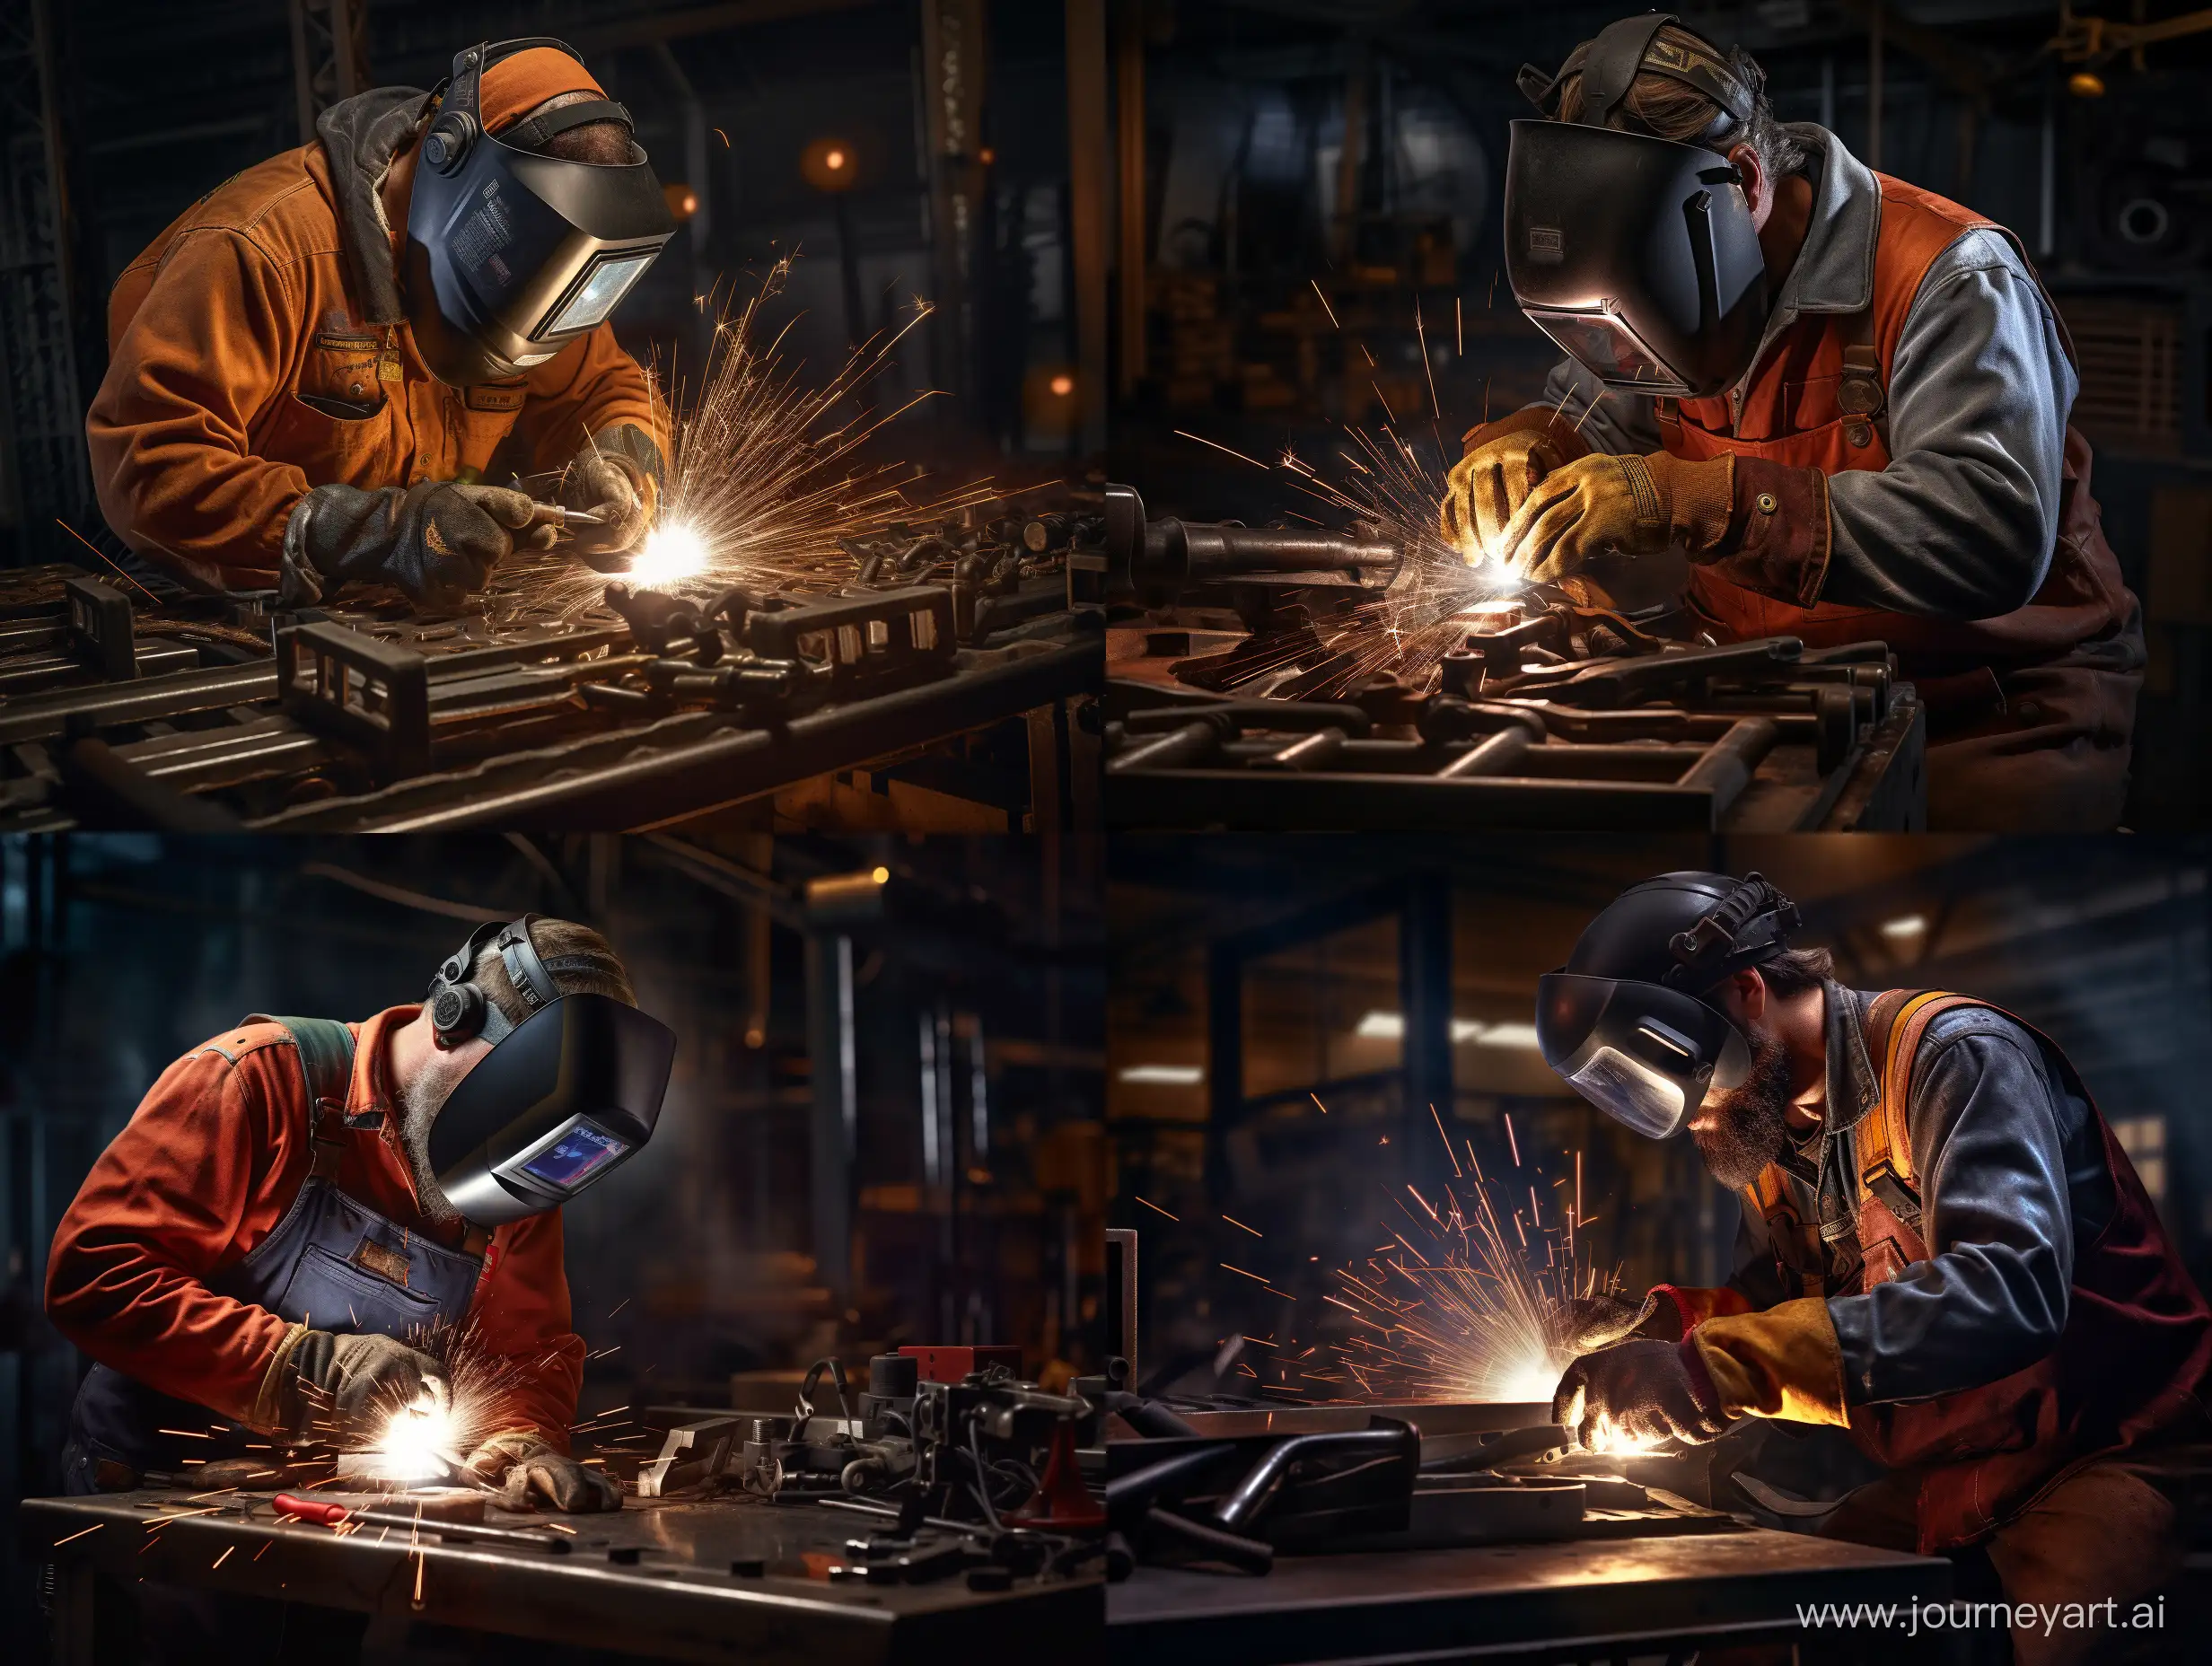 Professional-Welder-Crafting-Metal-Structure-with-Precision